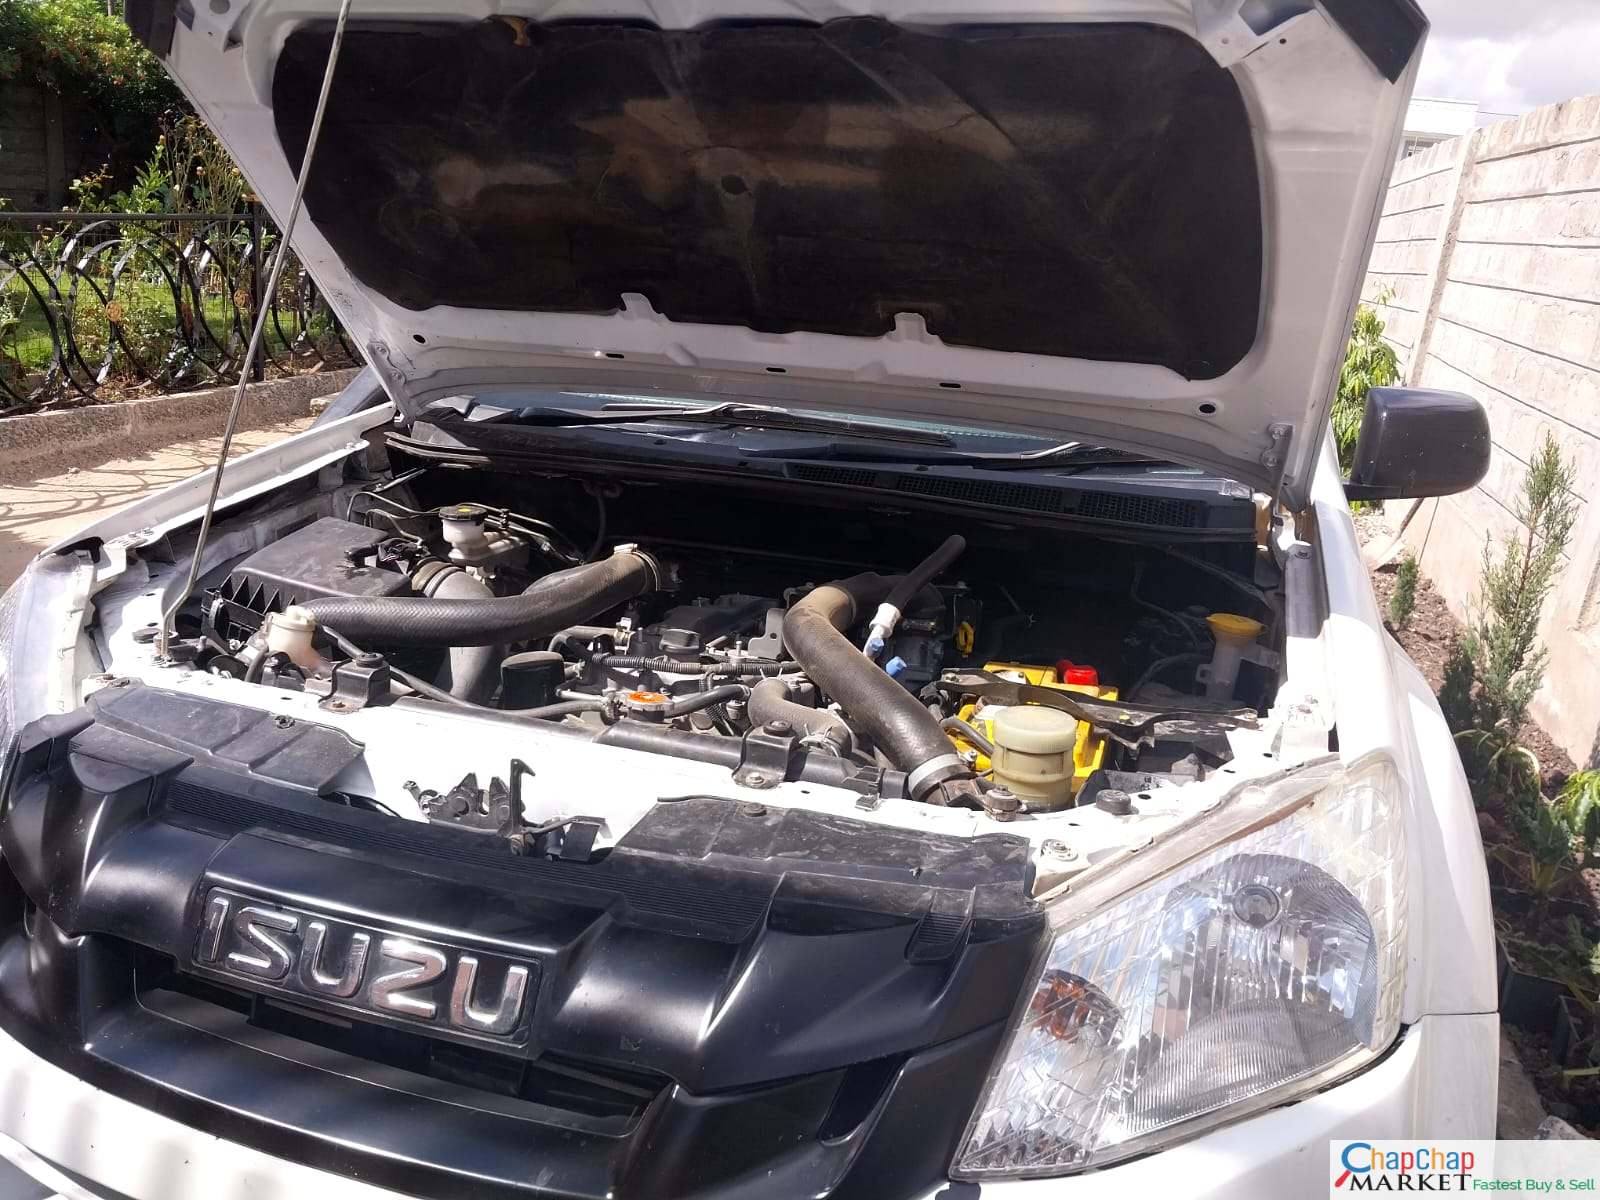 Isuzu D-max DMAX local assembly CHEAPEST YOU PAY 40% DEPOSIT Exclusive